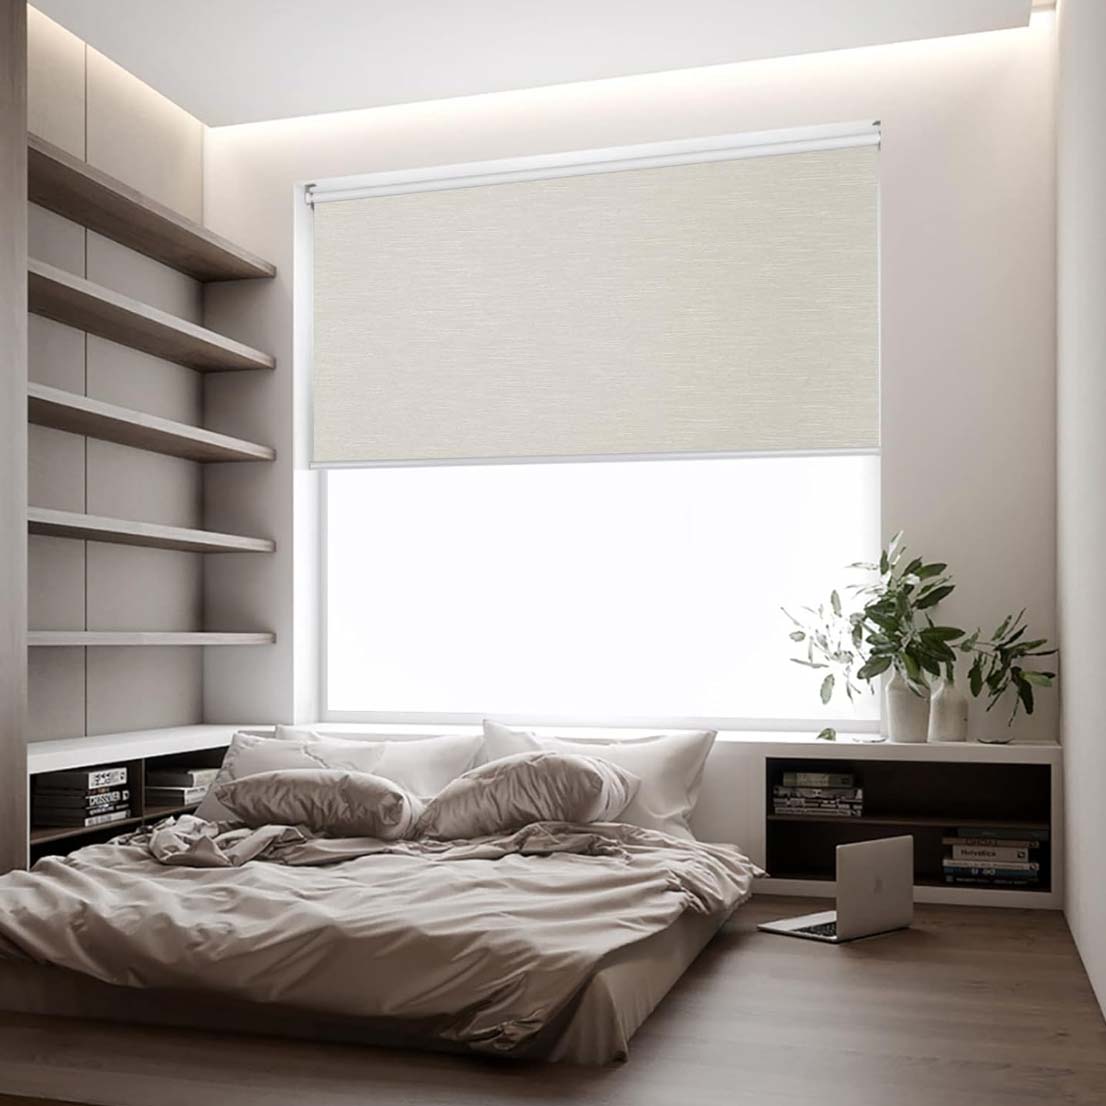 Off-white roller shades in bedroom setting